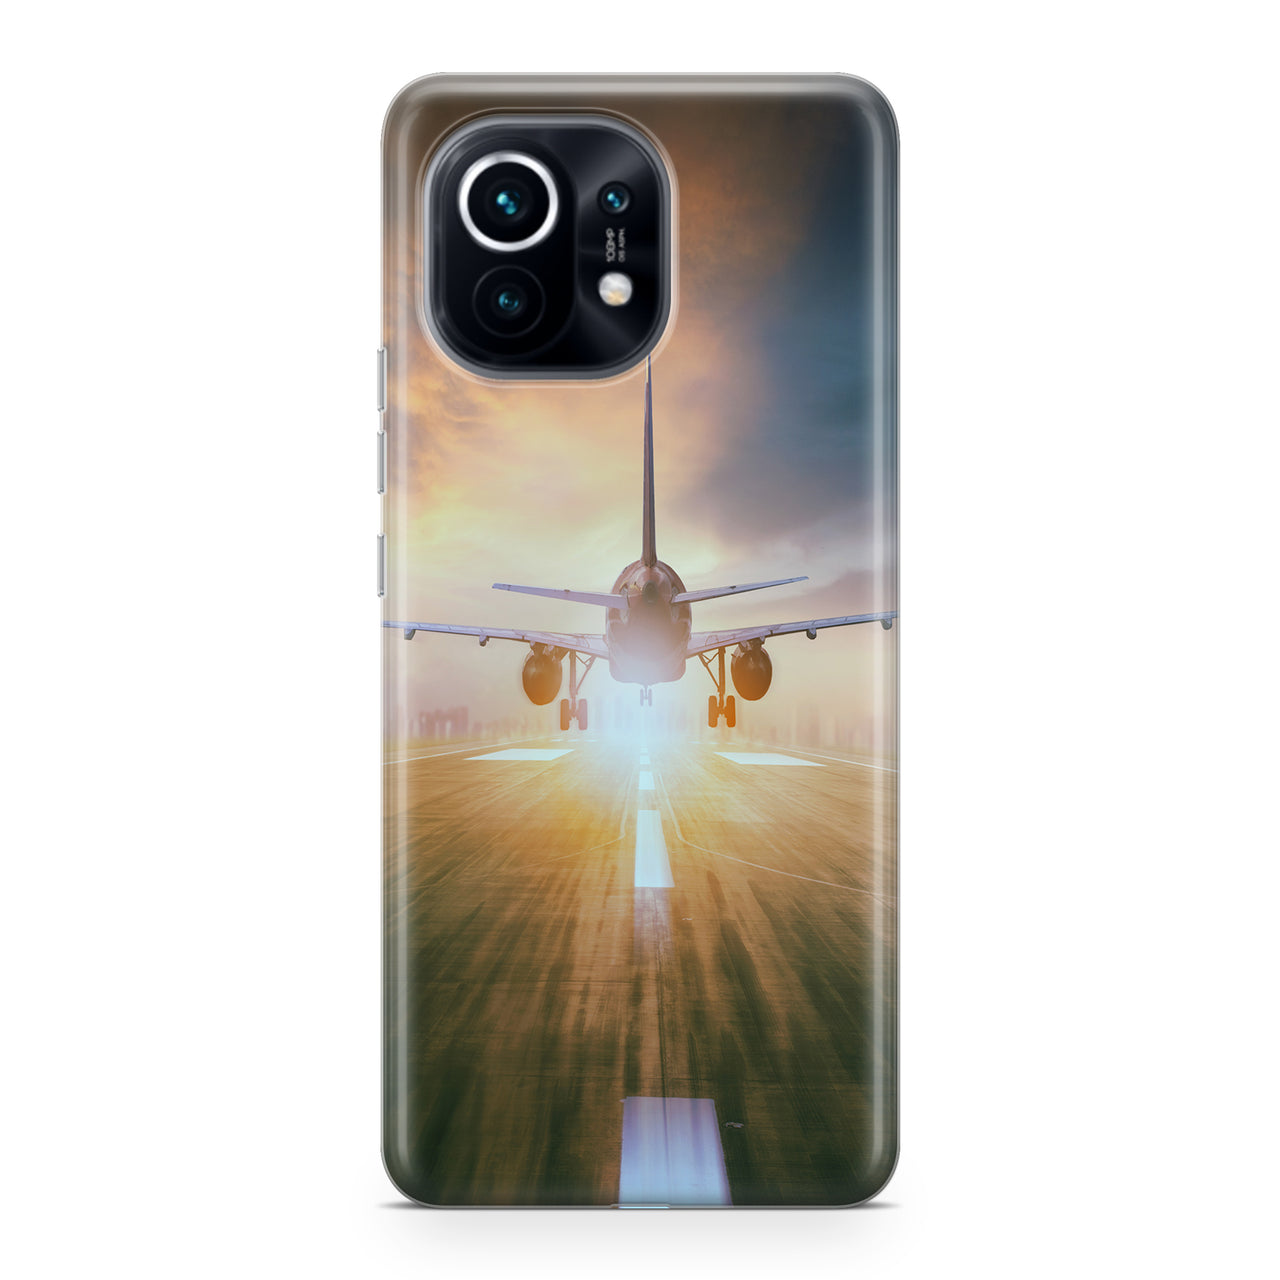 Airplane Flying Over Runway Designed Xiaomi Cases